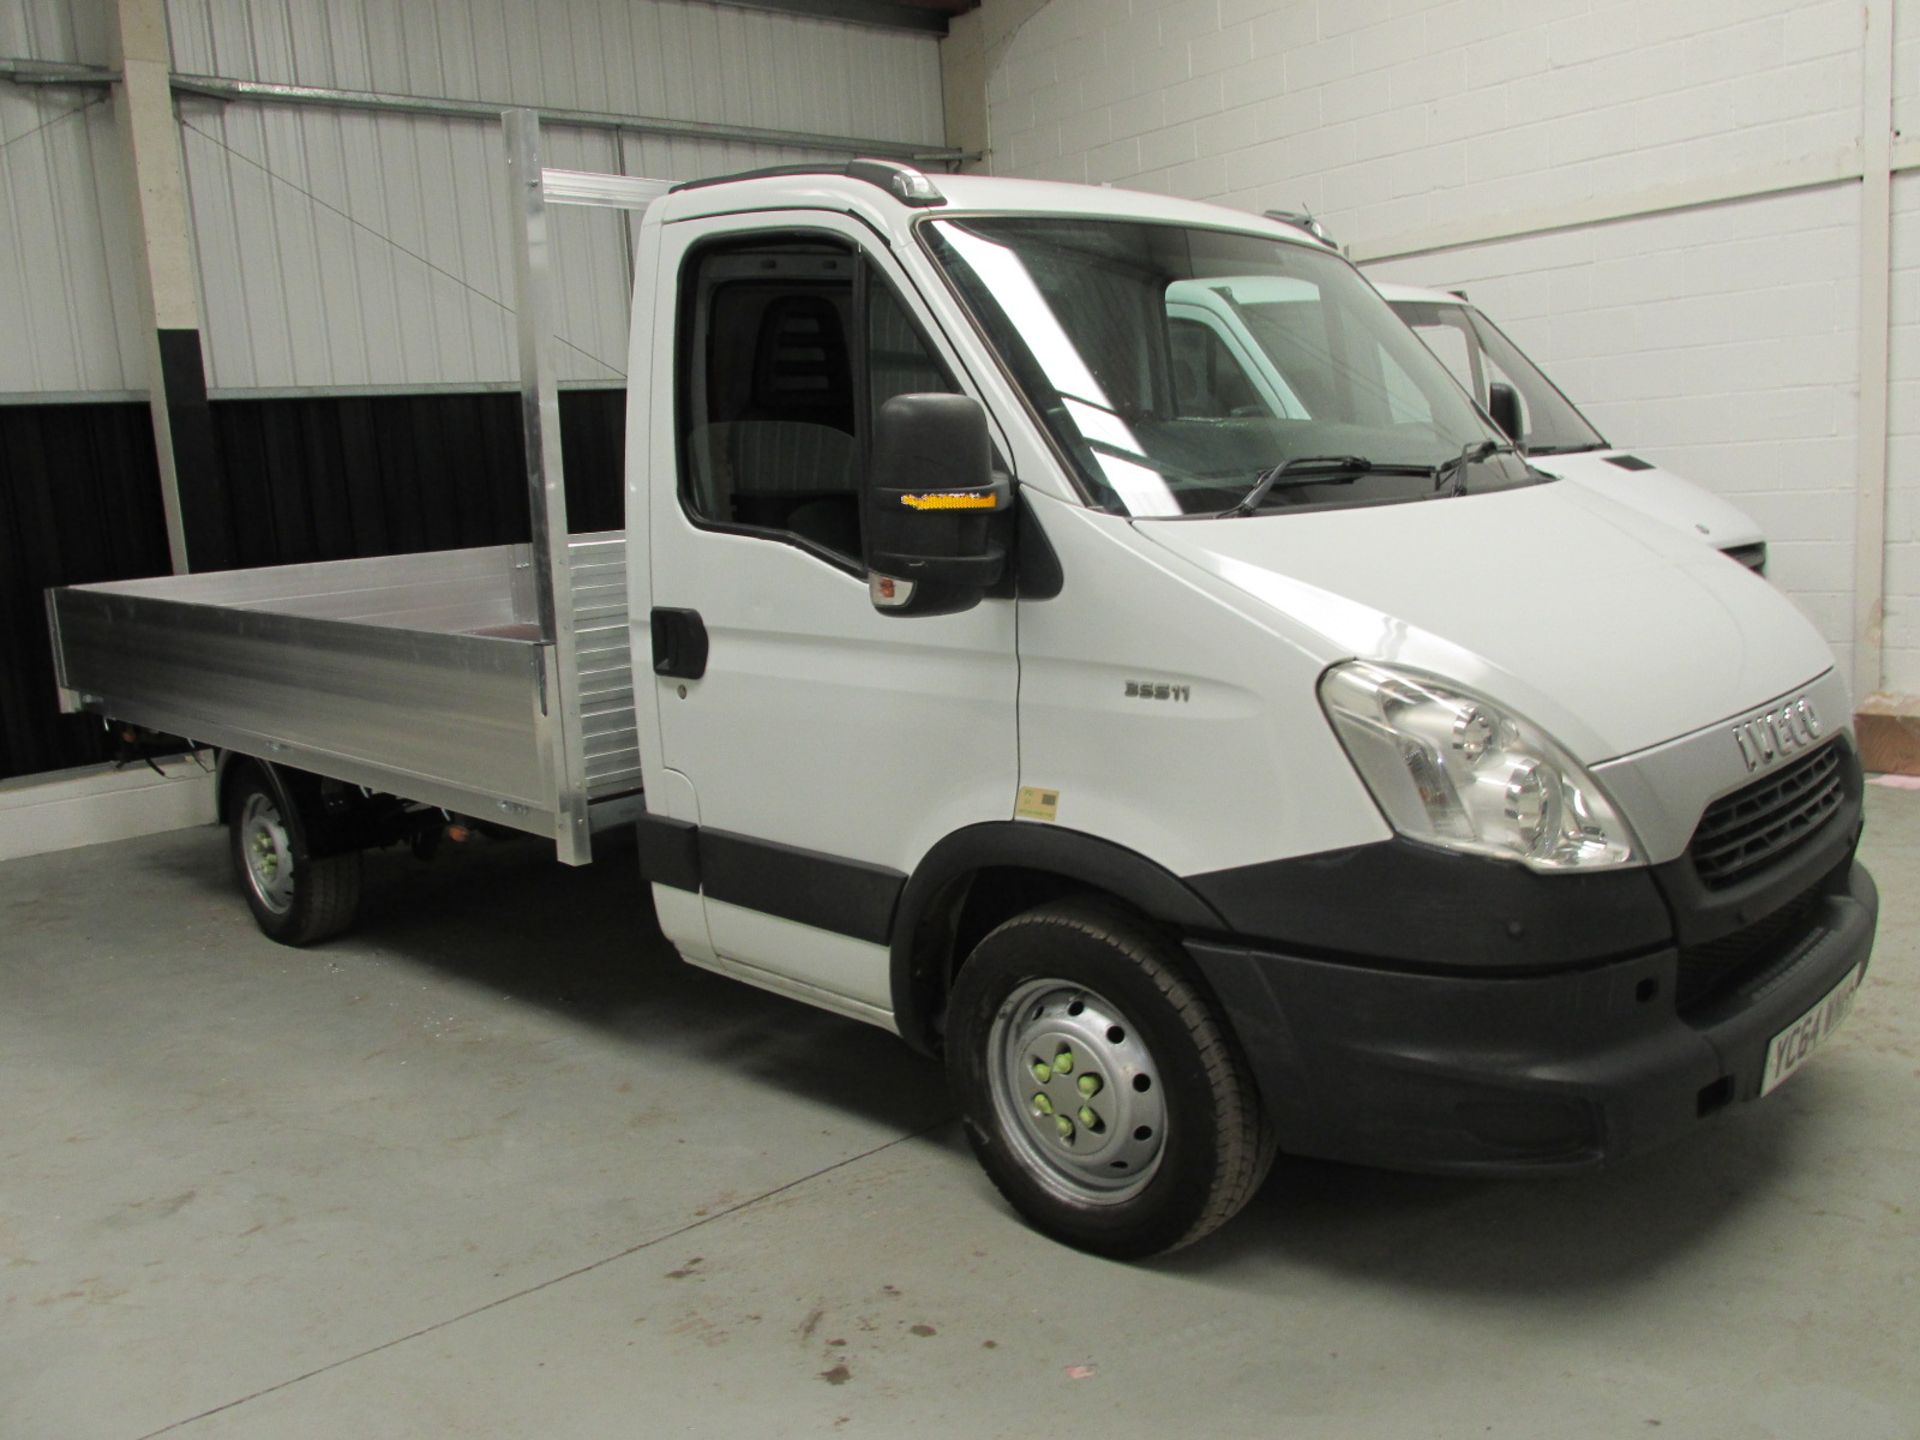 2014 Iveco Daily 35S11 3750 WB 2.4 HPi - Image 2 of 17